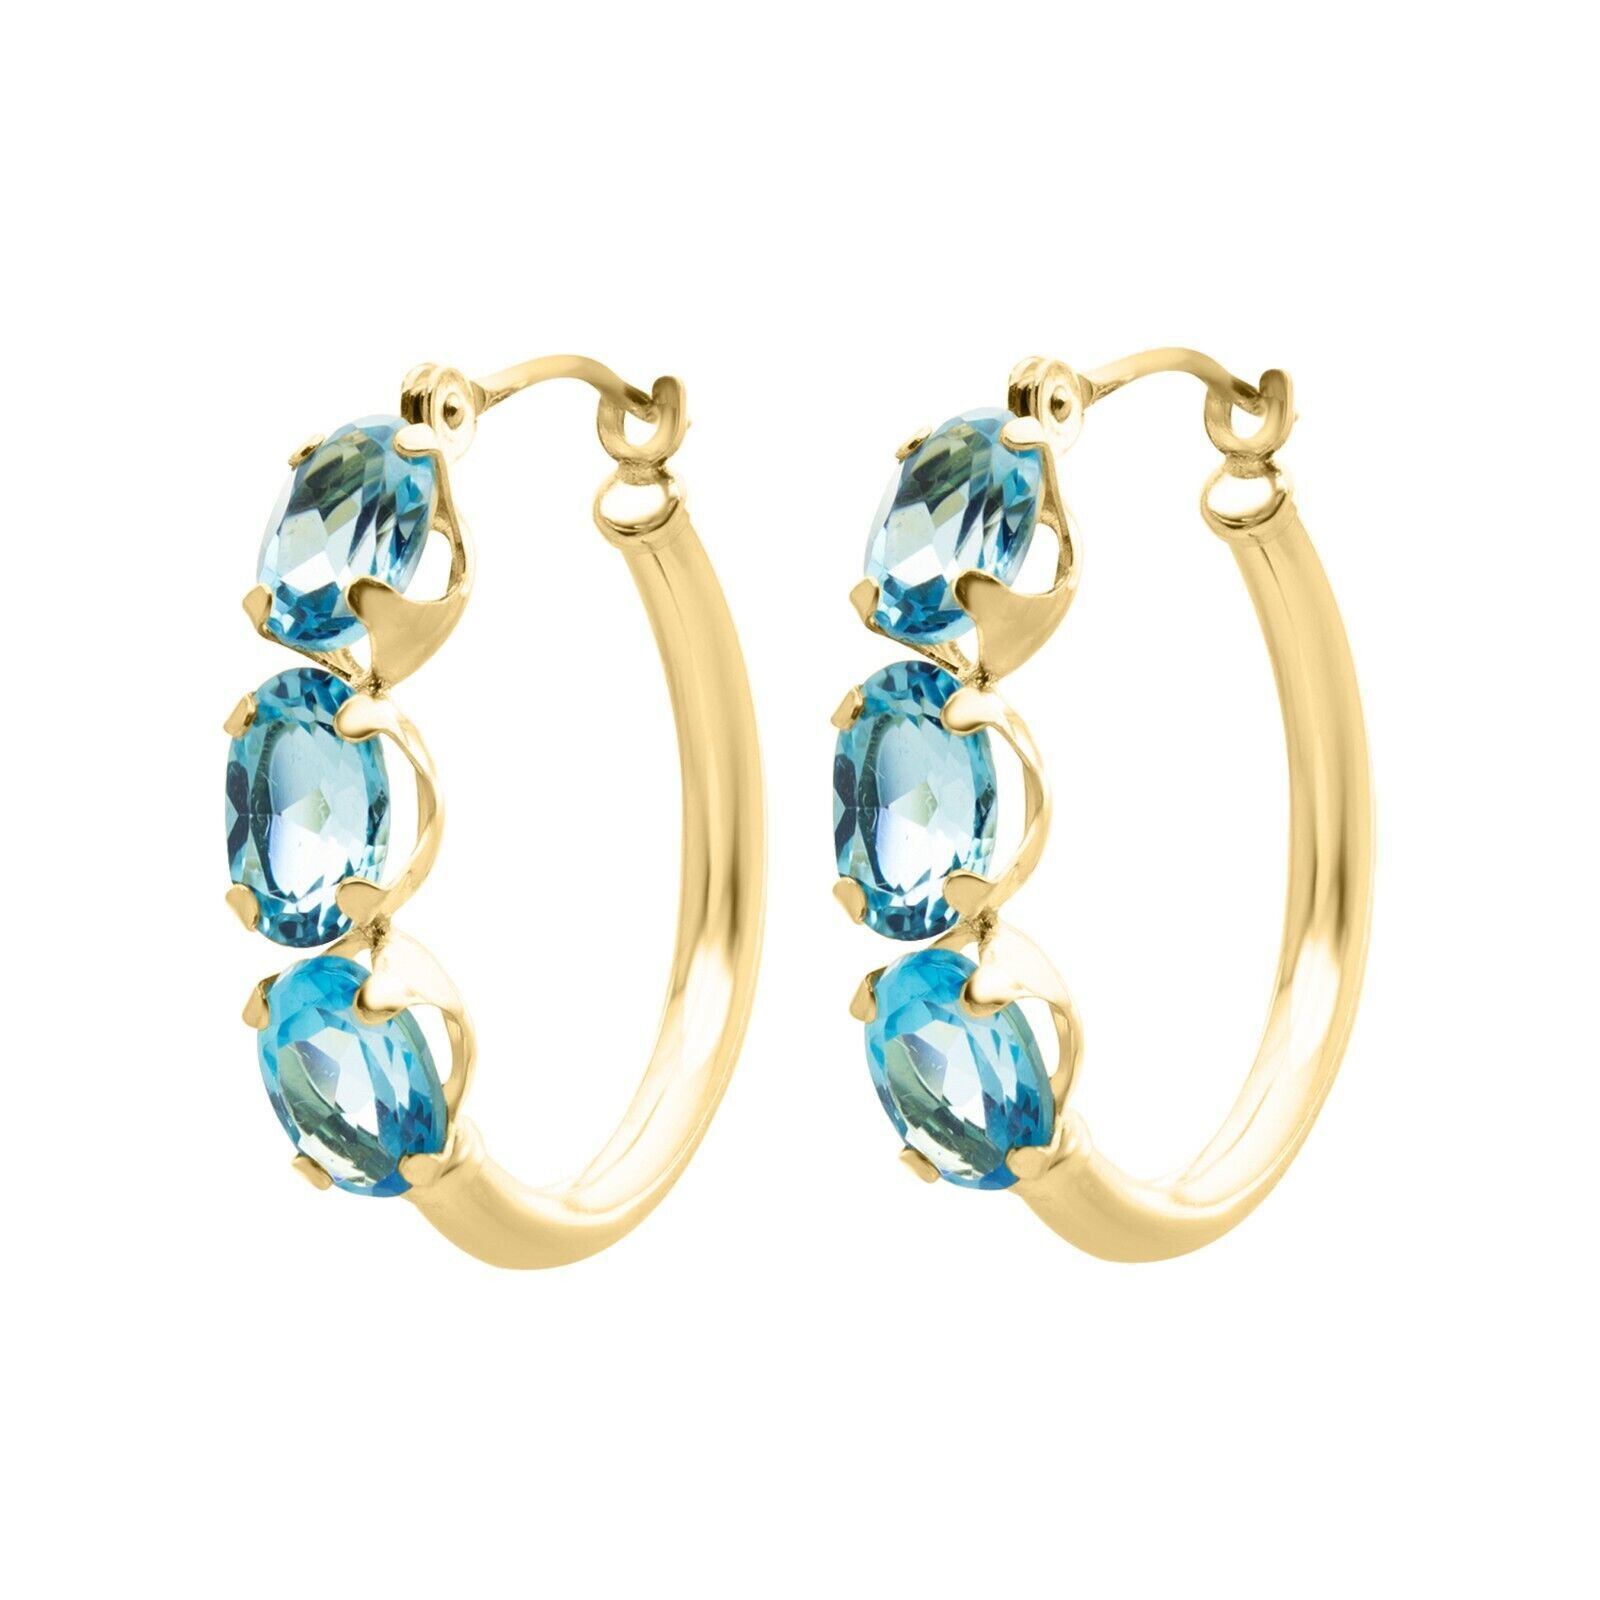 Primary image for 14K Yellow Gold Finish 925 Silver Oval Blue Topaz Hoop Earrings Seasonal Sale